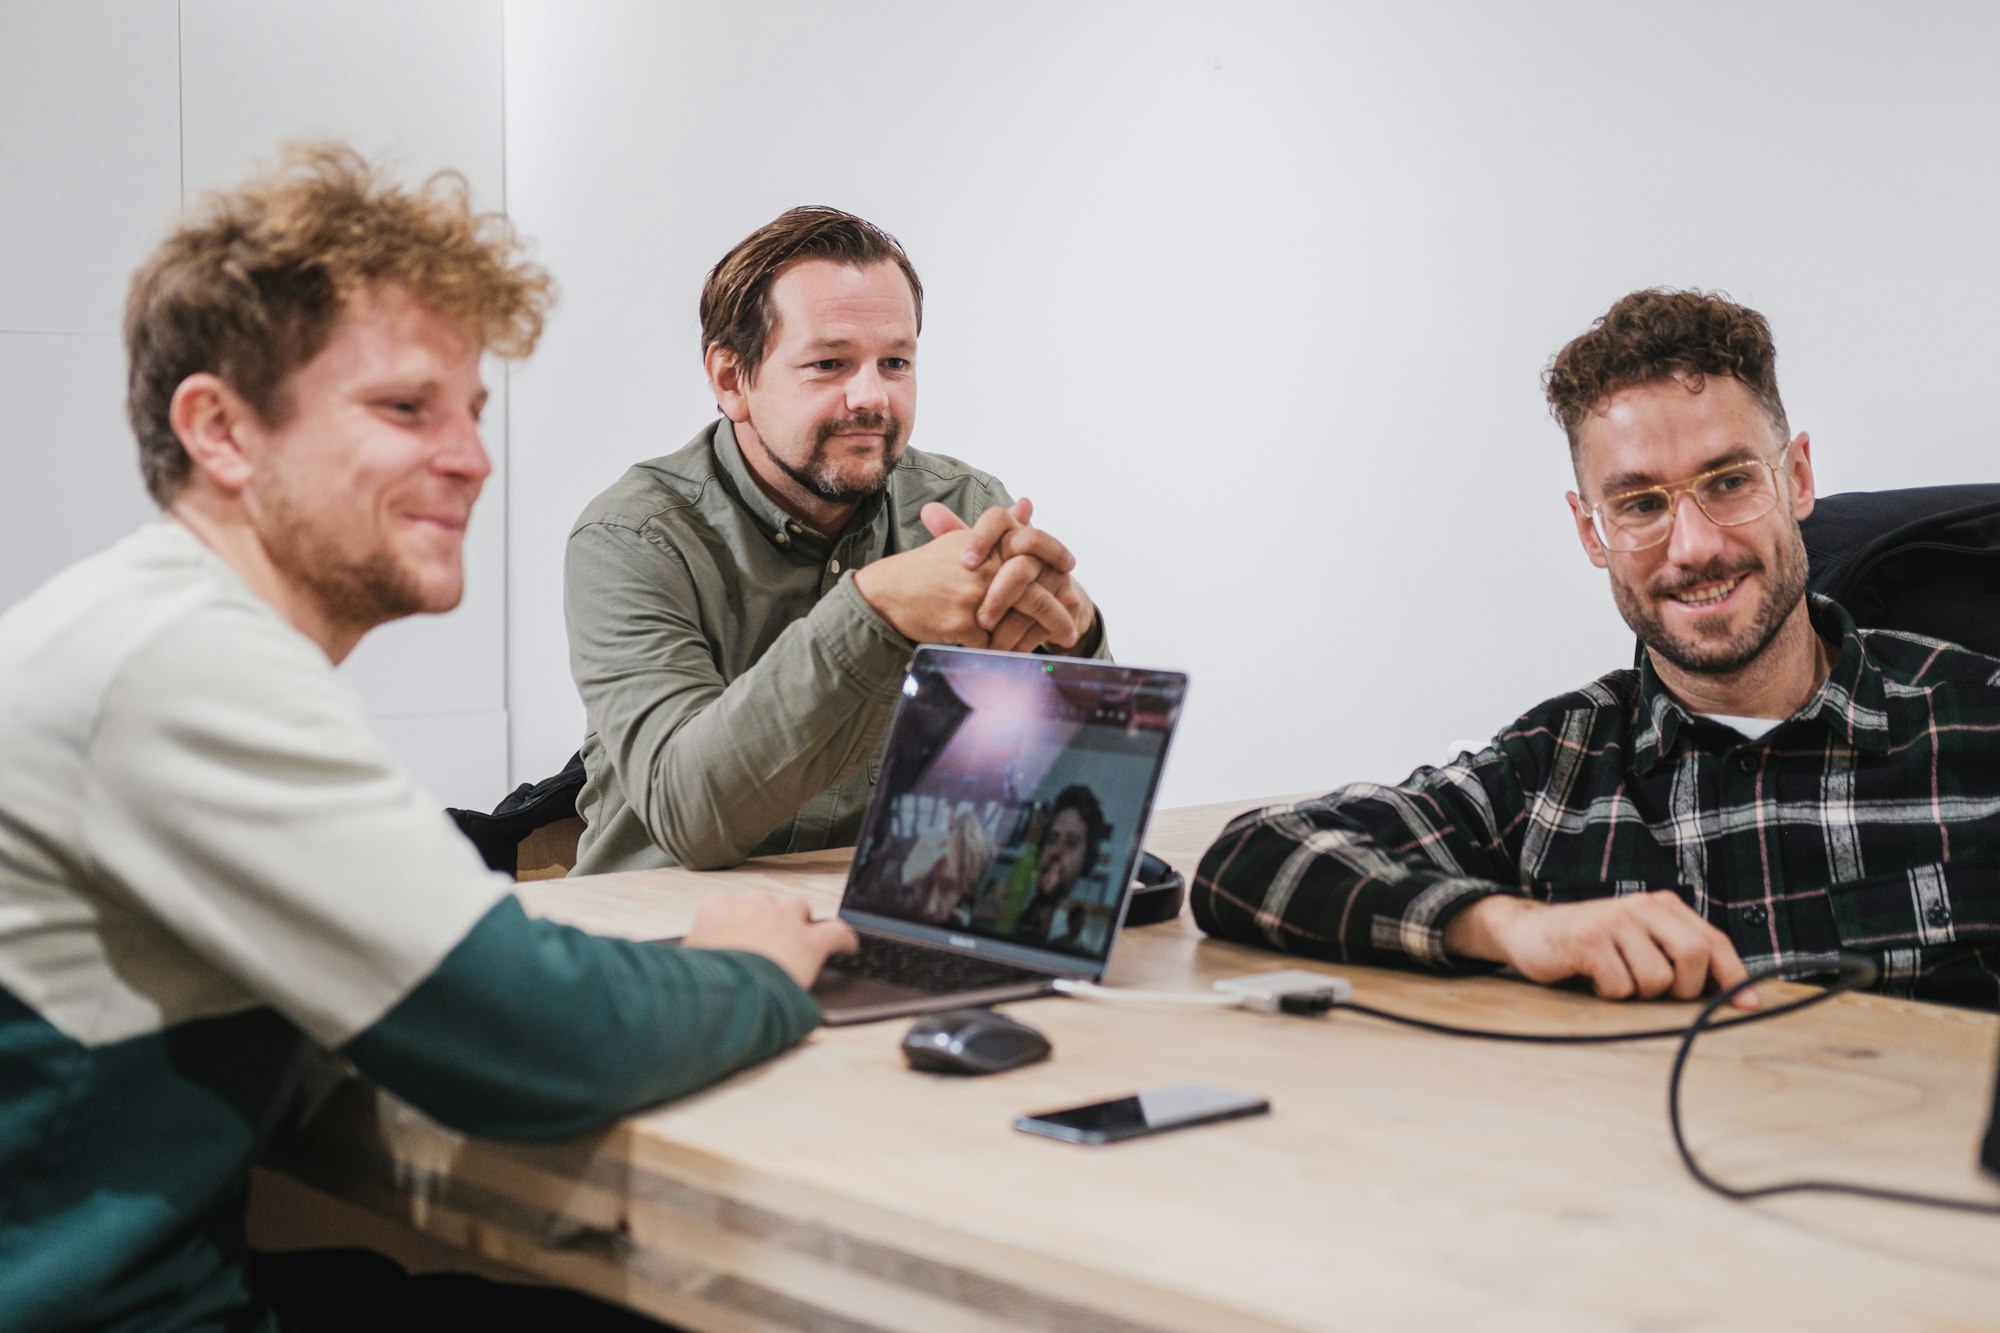 Skilpod team members during a meeting